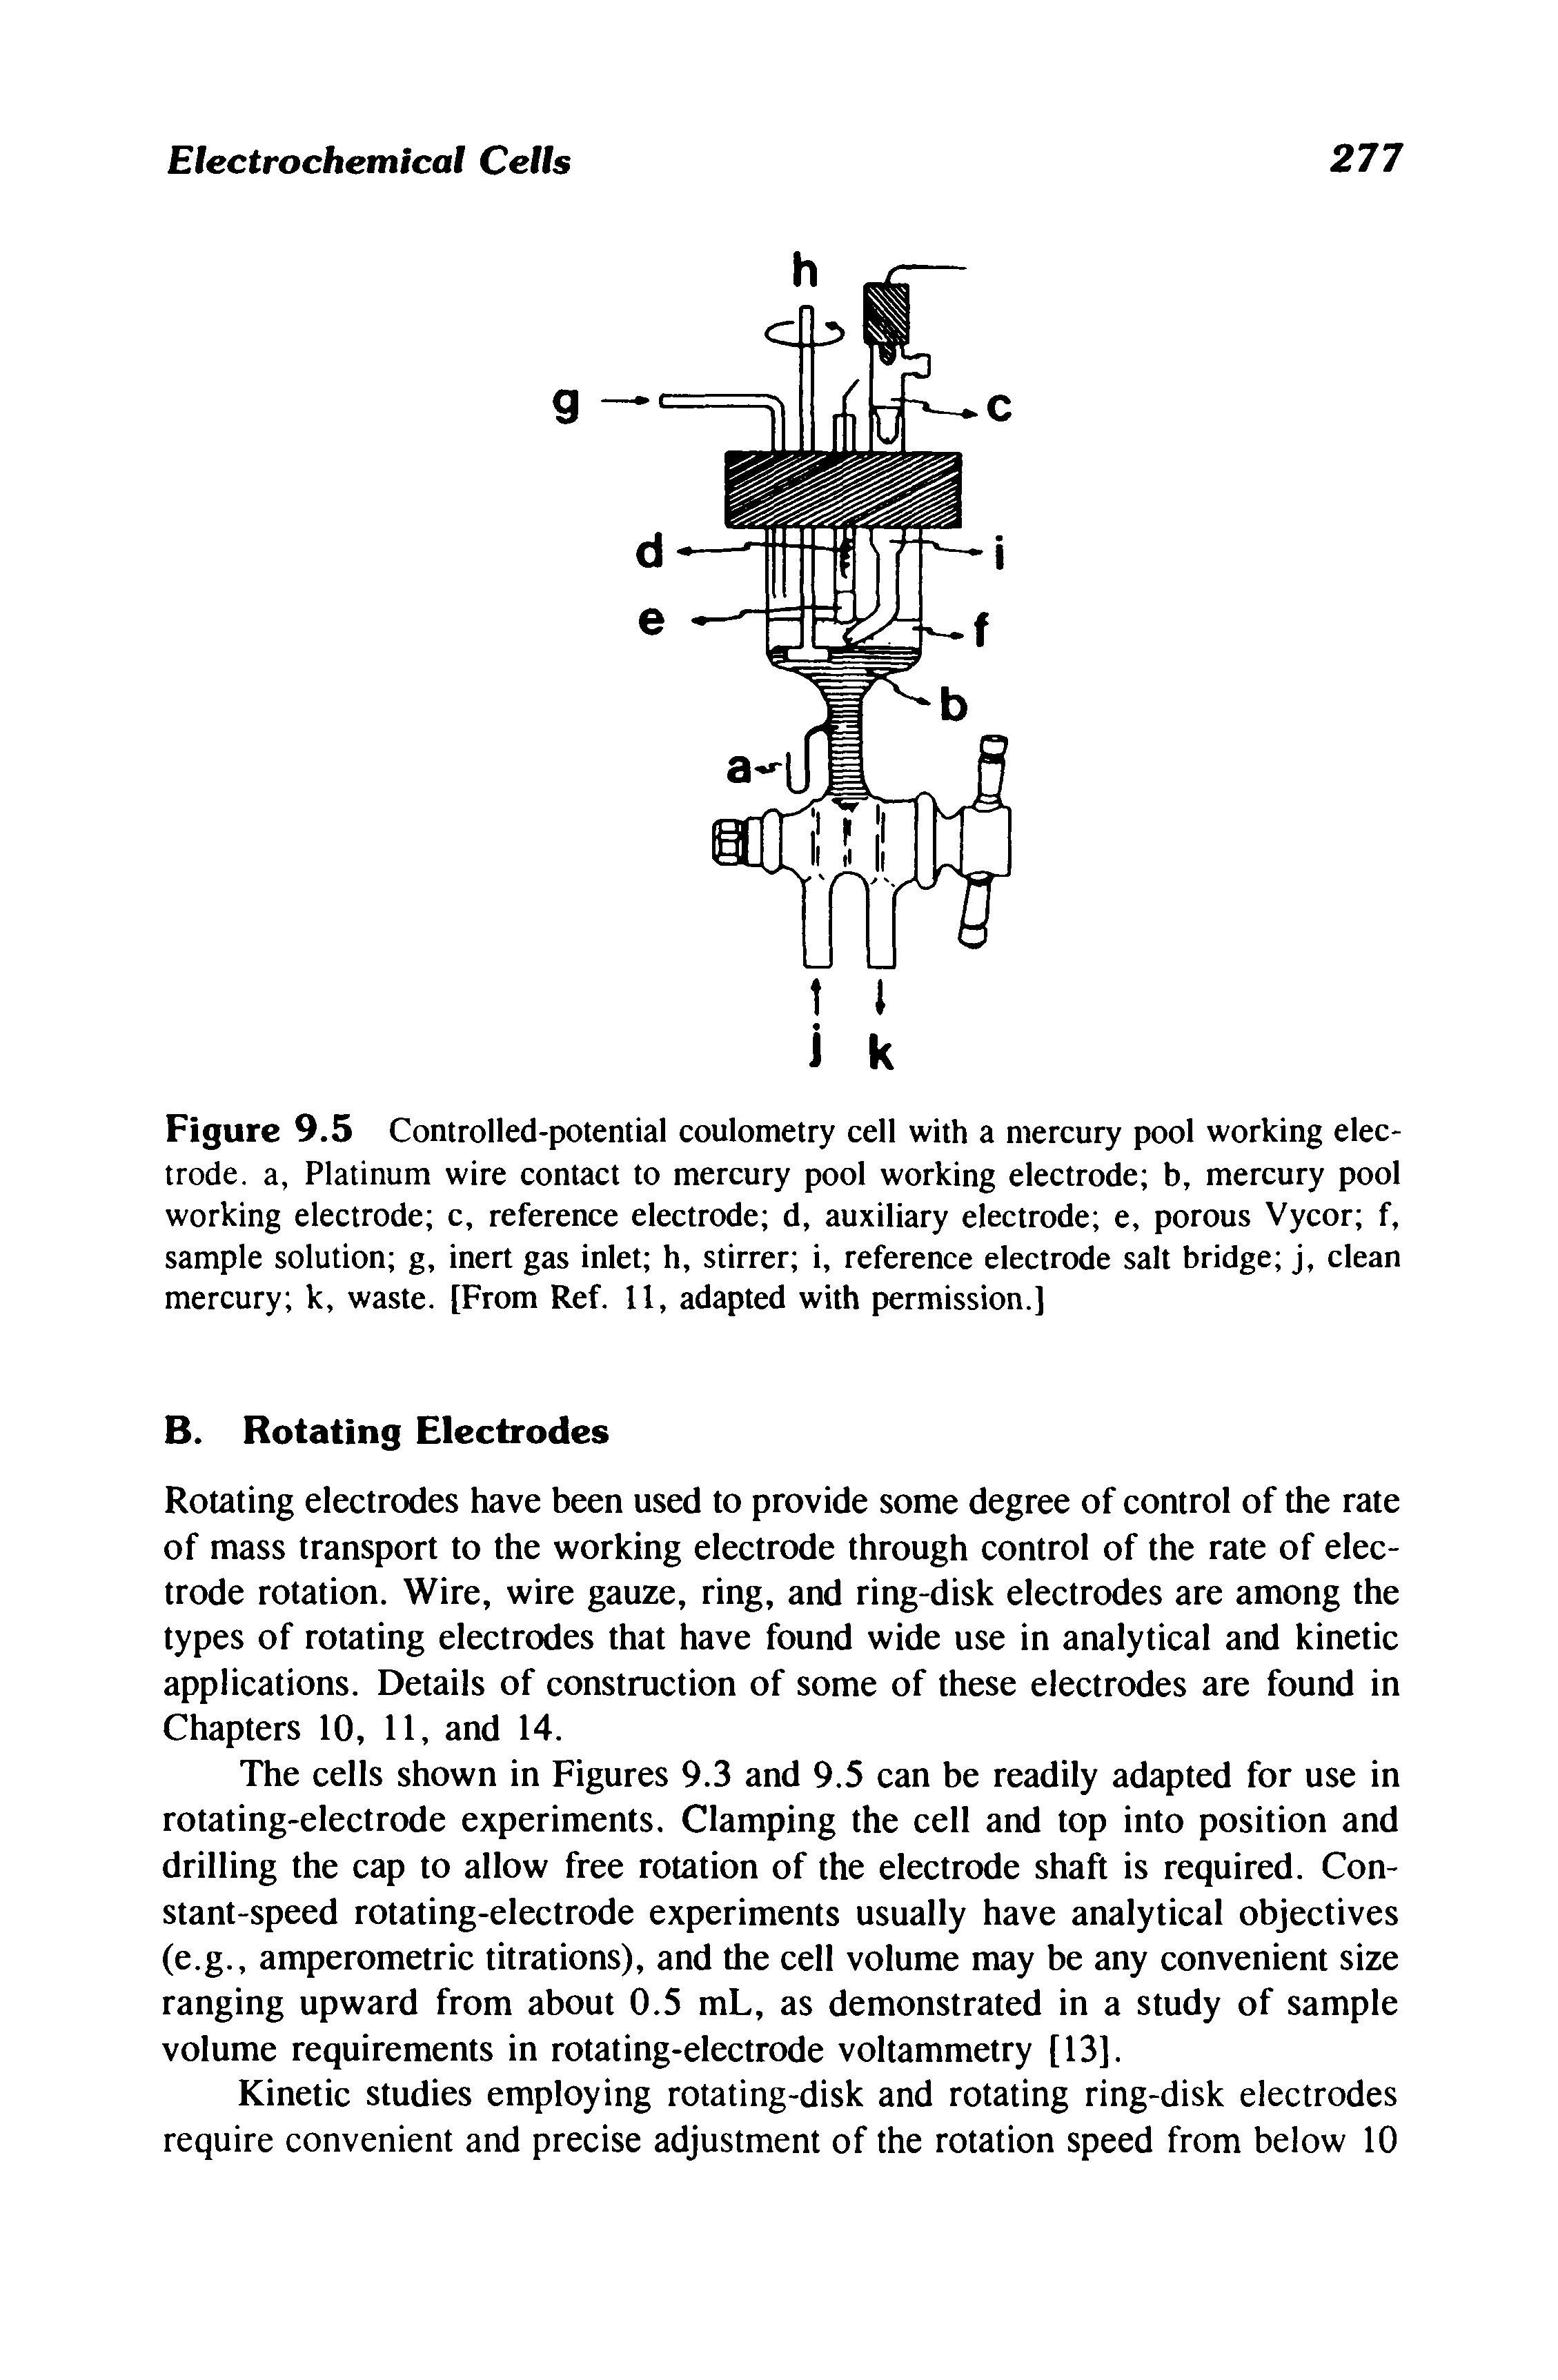 Figure 9.5 Controlled-potential coulometry cell with a mercury pool working electrode. a, Platinum wire contact to mercury pool working electrode b, mercury pool working electrode c, reference electrode d, auxiliary electrode e, porous Vycor f, sample solution g, inert gas inlet h, stirrer i, reference electrode salt bridge j, clean mercury k, waste. [From Ref. 11, adapted with permission.]...